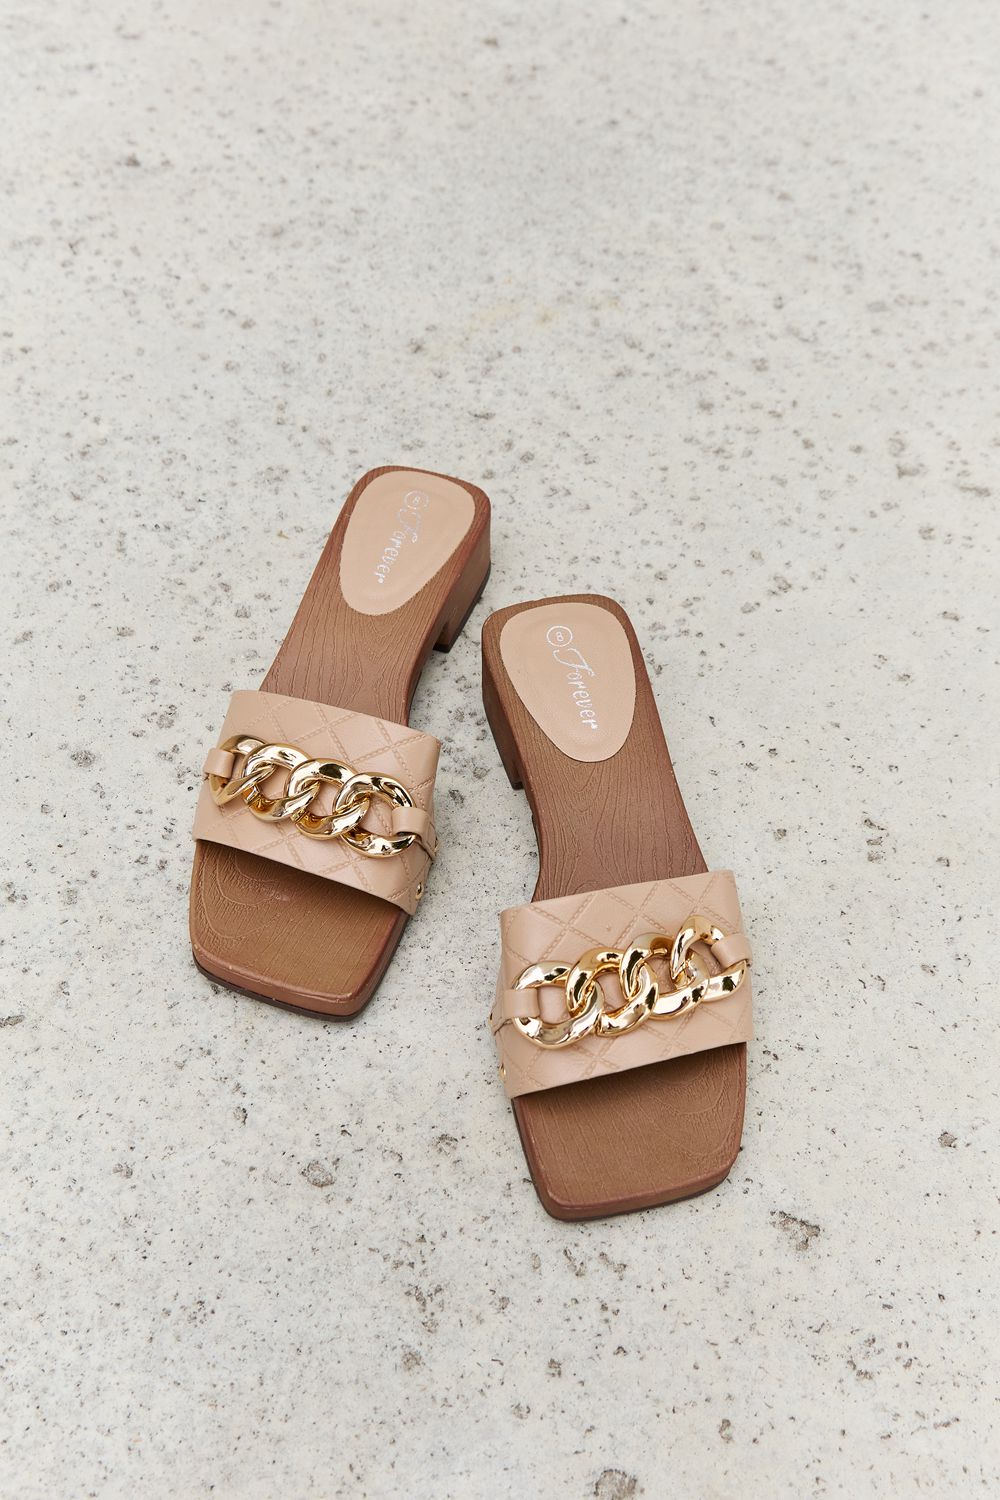 Better Than Before Nude Chain Clogs - Cheeky Chic Boutique